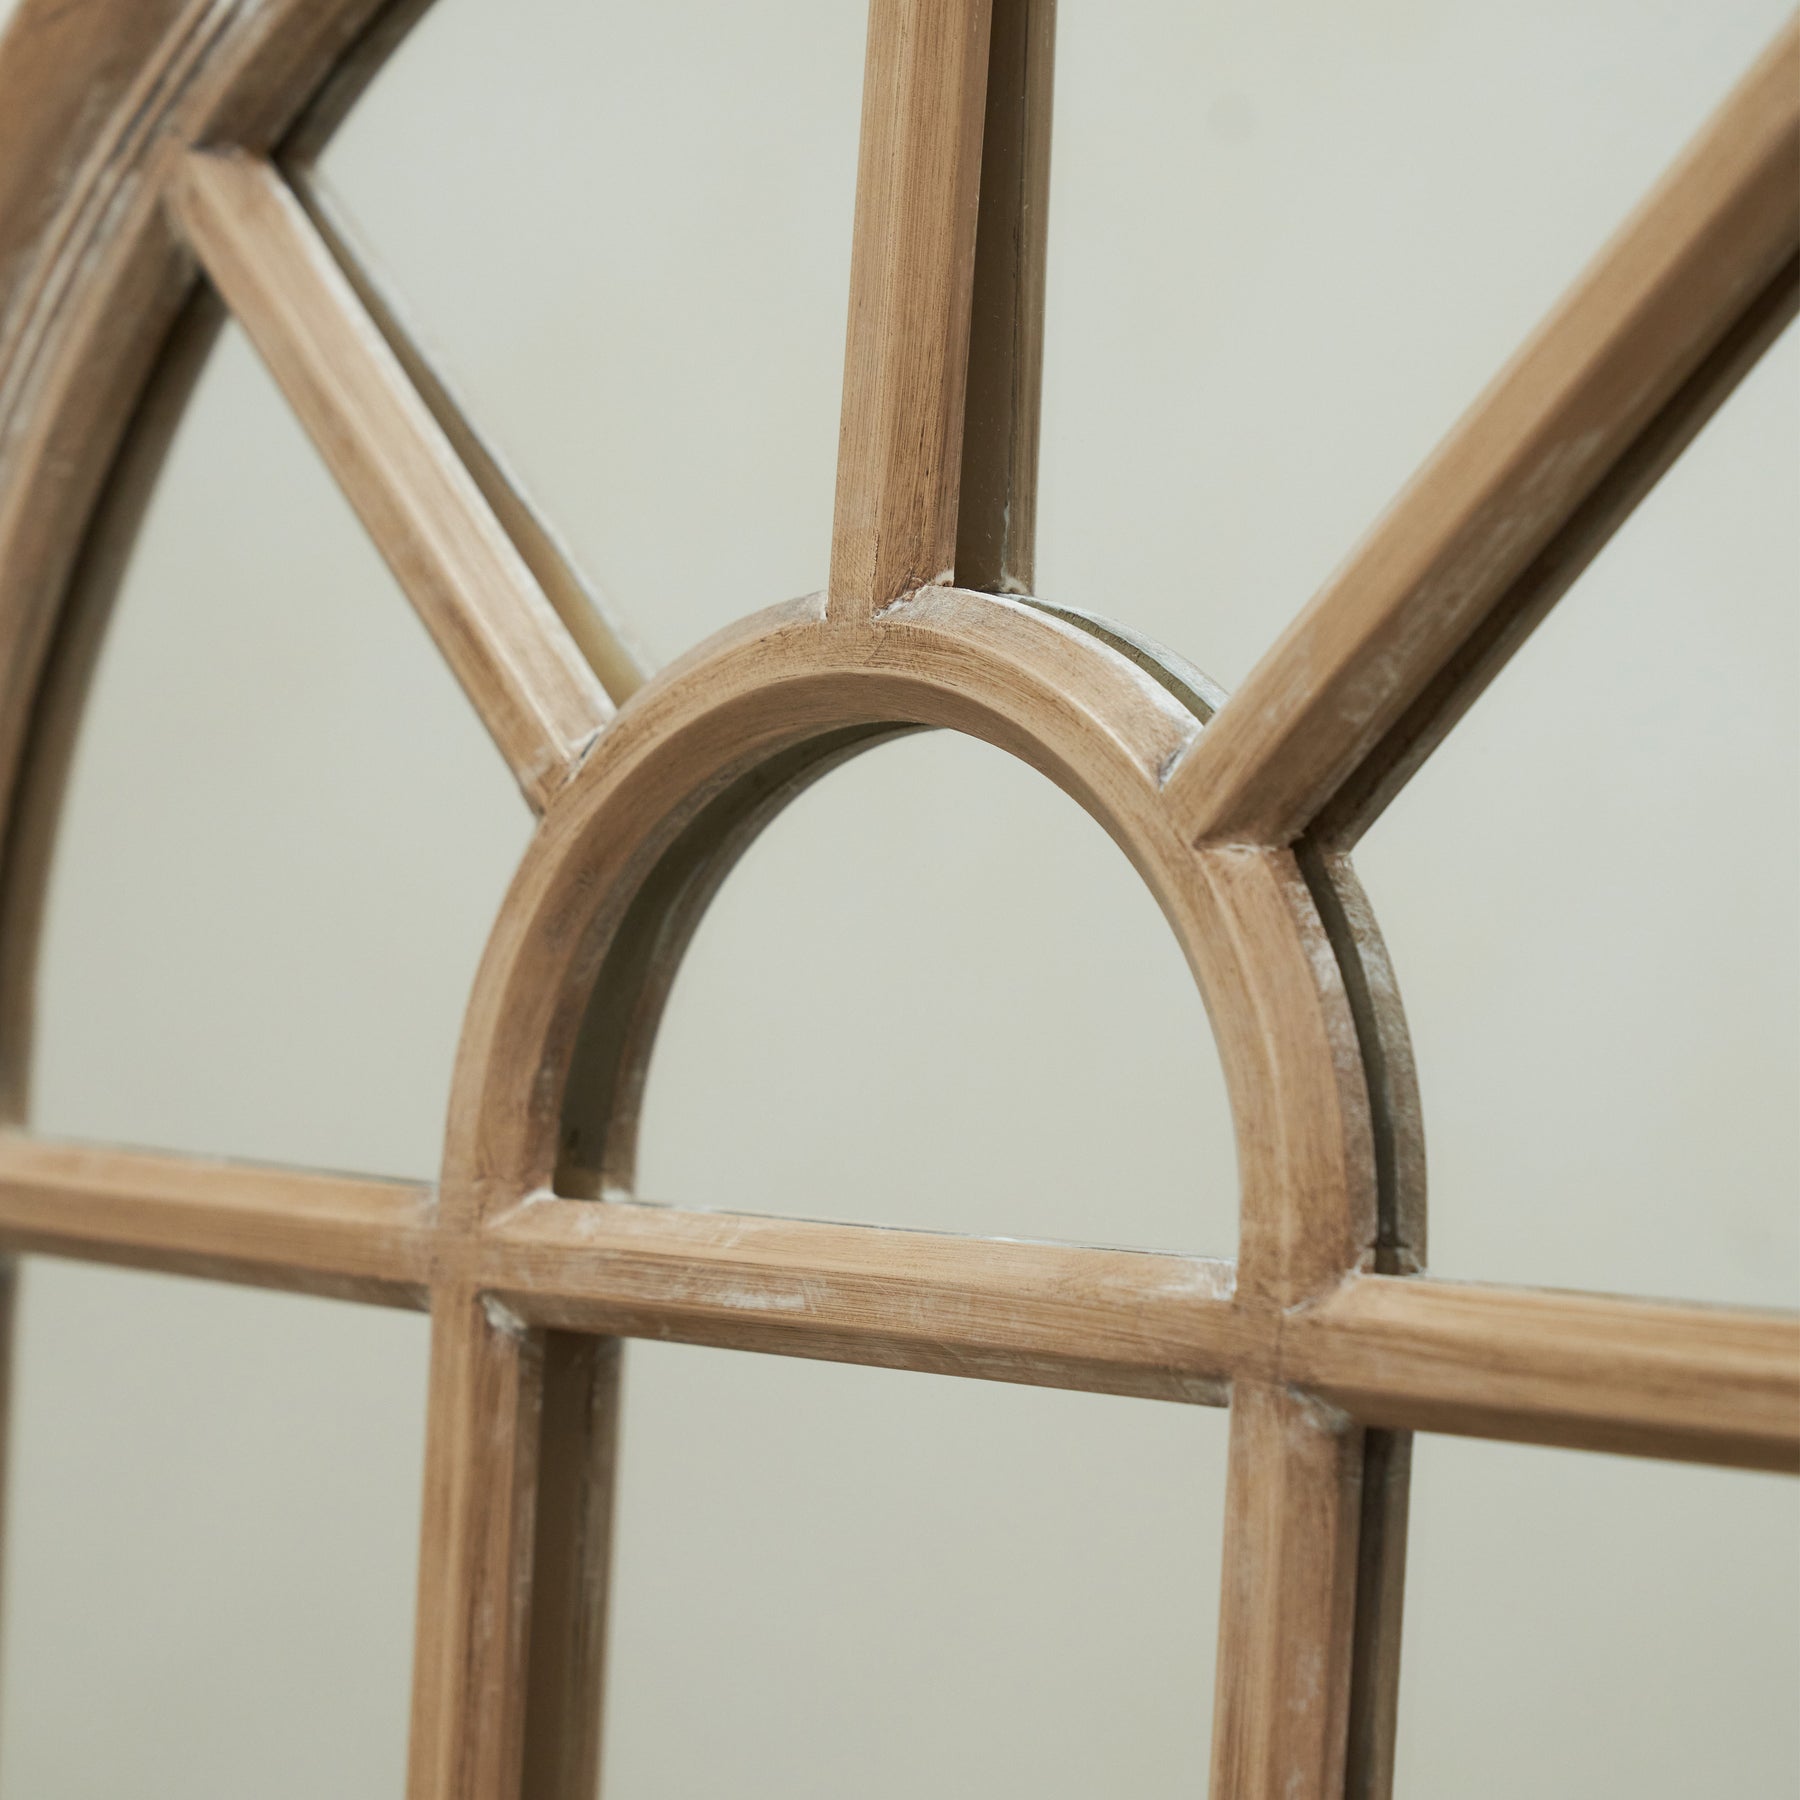 Detail shot of our Washed Wood Arched Shabby Chic Window Mirror window pane design